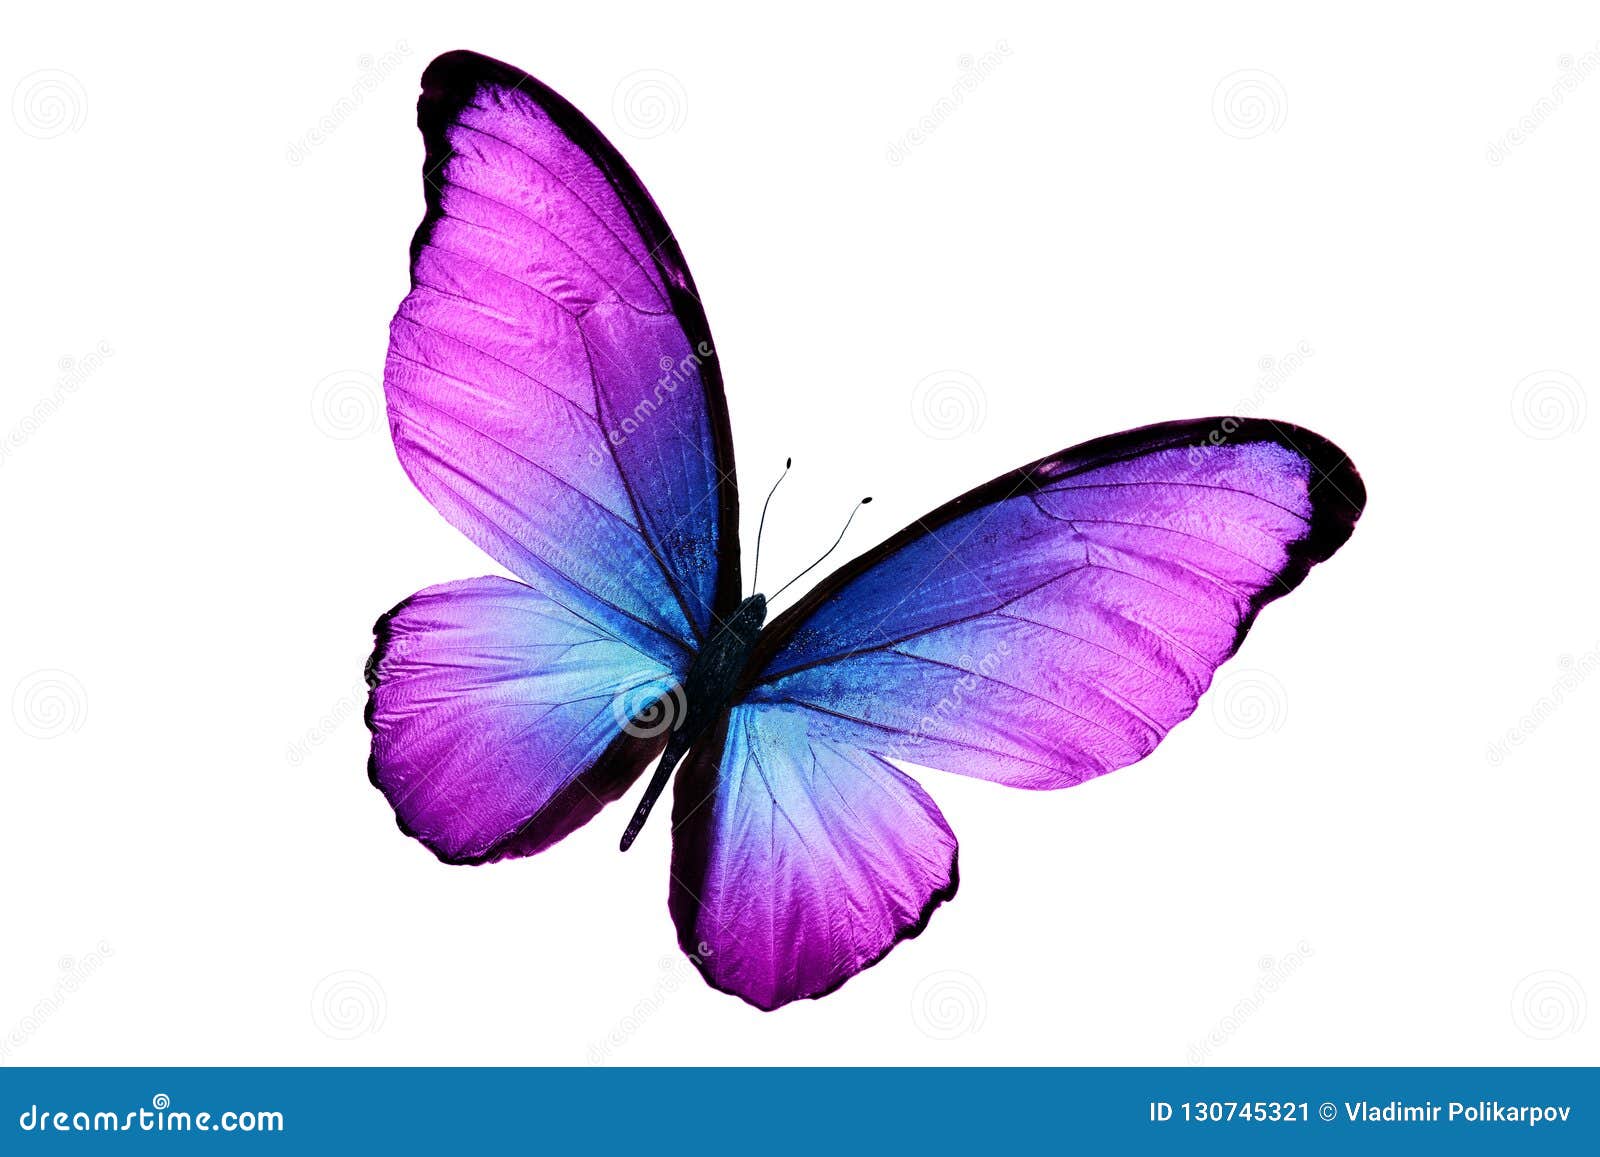 29 178 Purple Butterfly Background Photos Free Royalty Free Stock Photos From Dreamstime